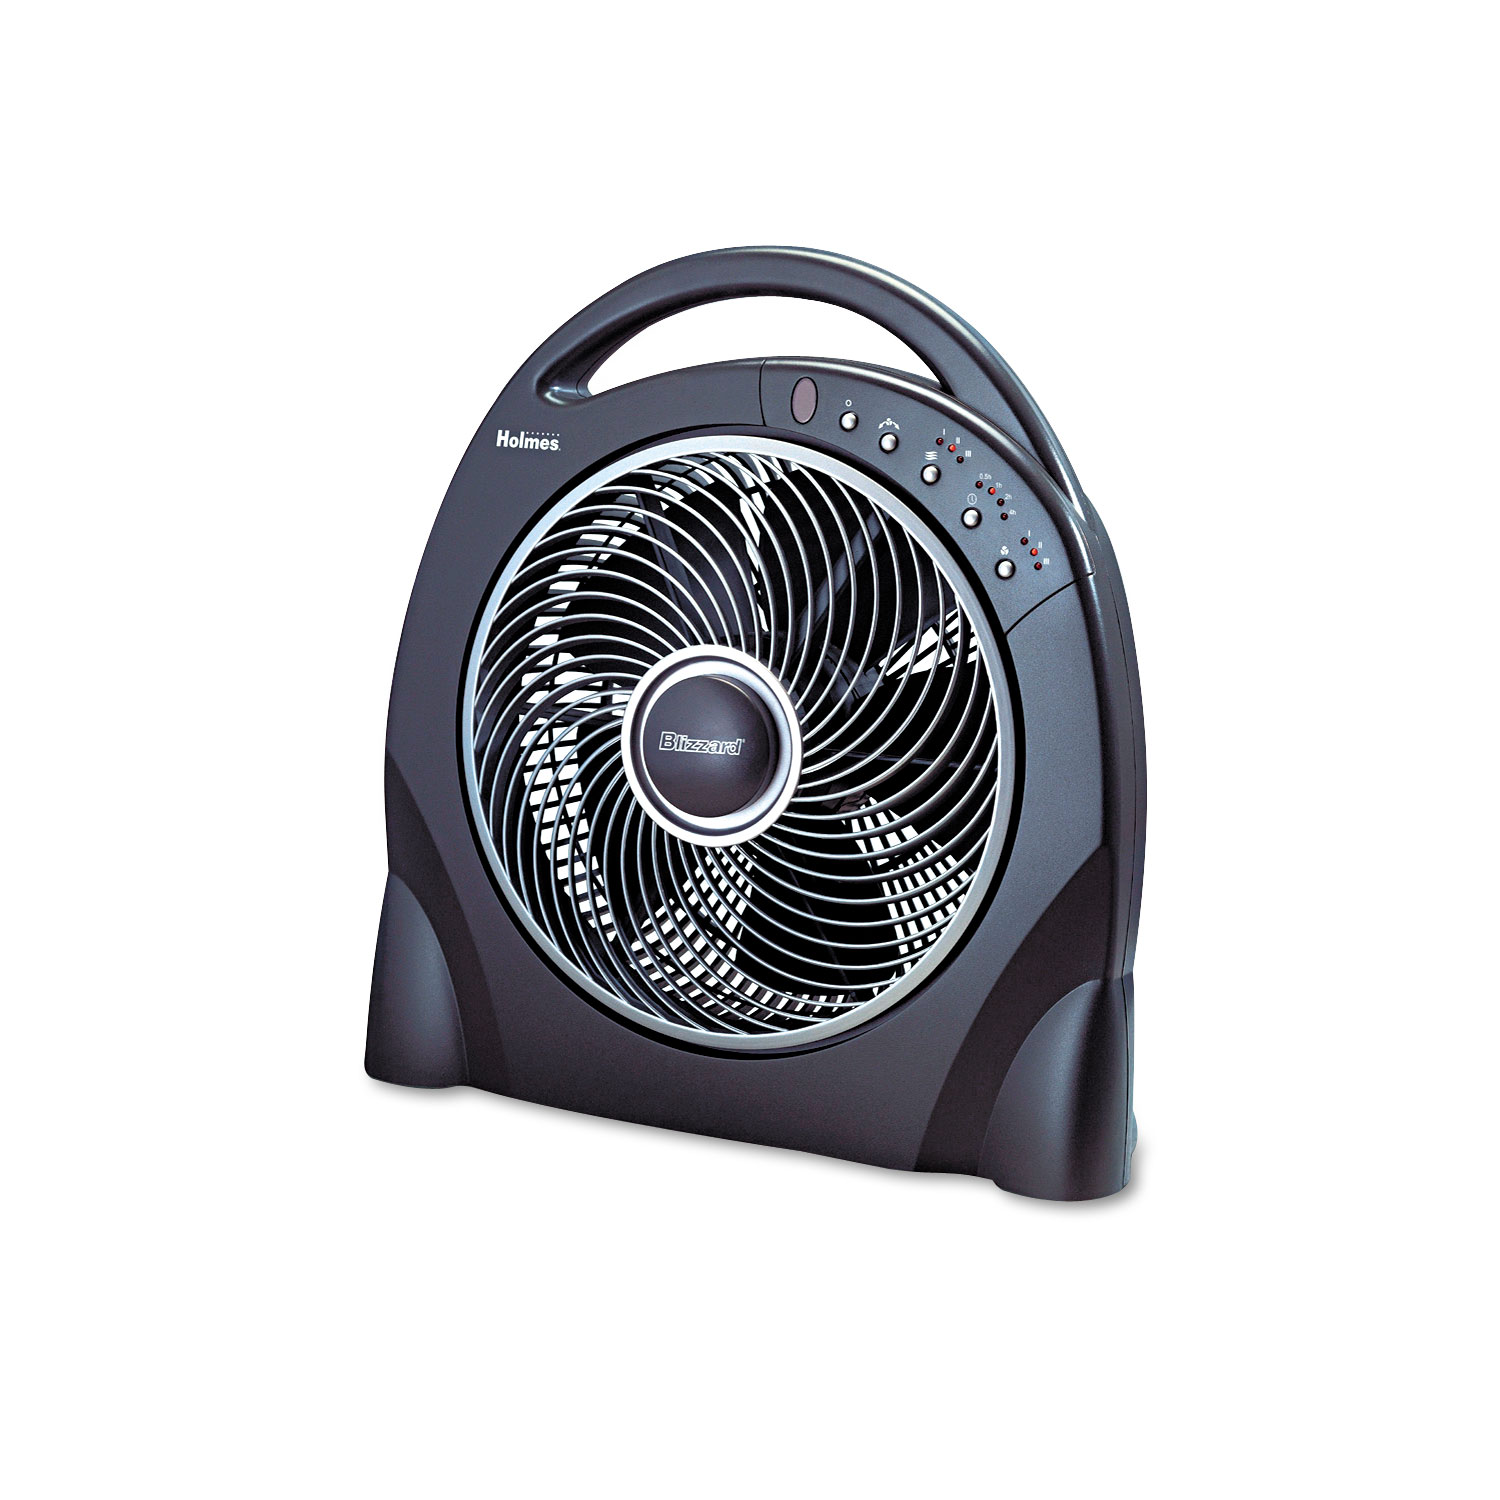  Holmes HAPF624RUC 12 Oscillating Floor Fan w/Remote, Breeze Modes, 8hr Timer (HLSHAPF624RUC) 